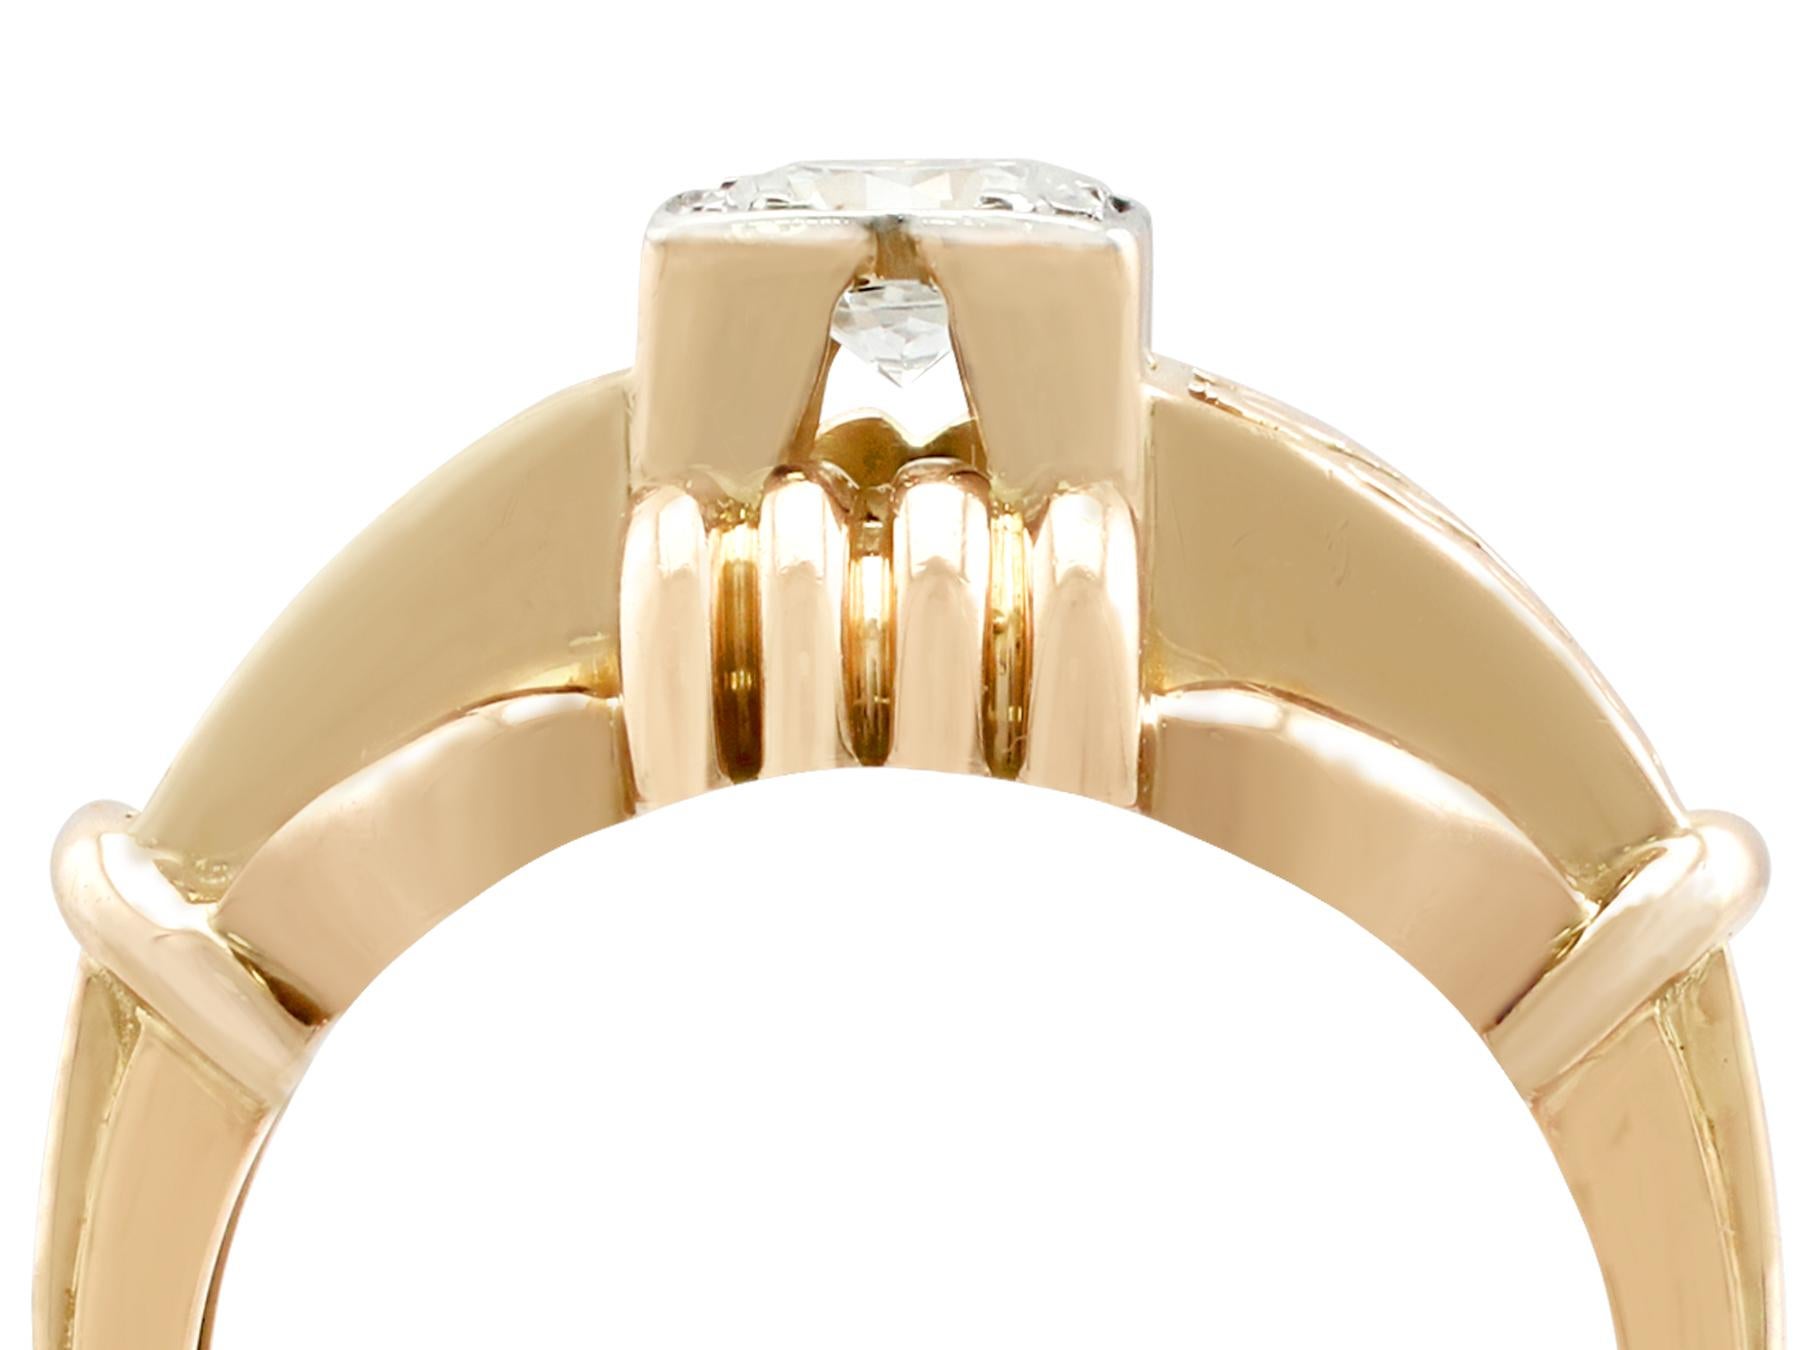 An impressive vintage French 0.28 carat diamond and 18 karat yellow gold, platinum set cocktail ring; part of our diverse diamond jewelry and estate jewelry collections.

This fine and impressive 1940's gold diamond ring has been crafted in 18k